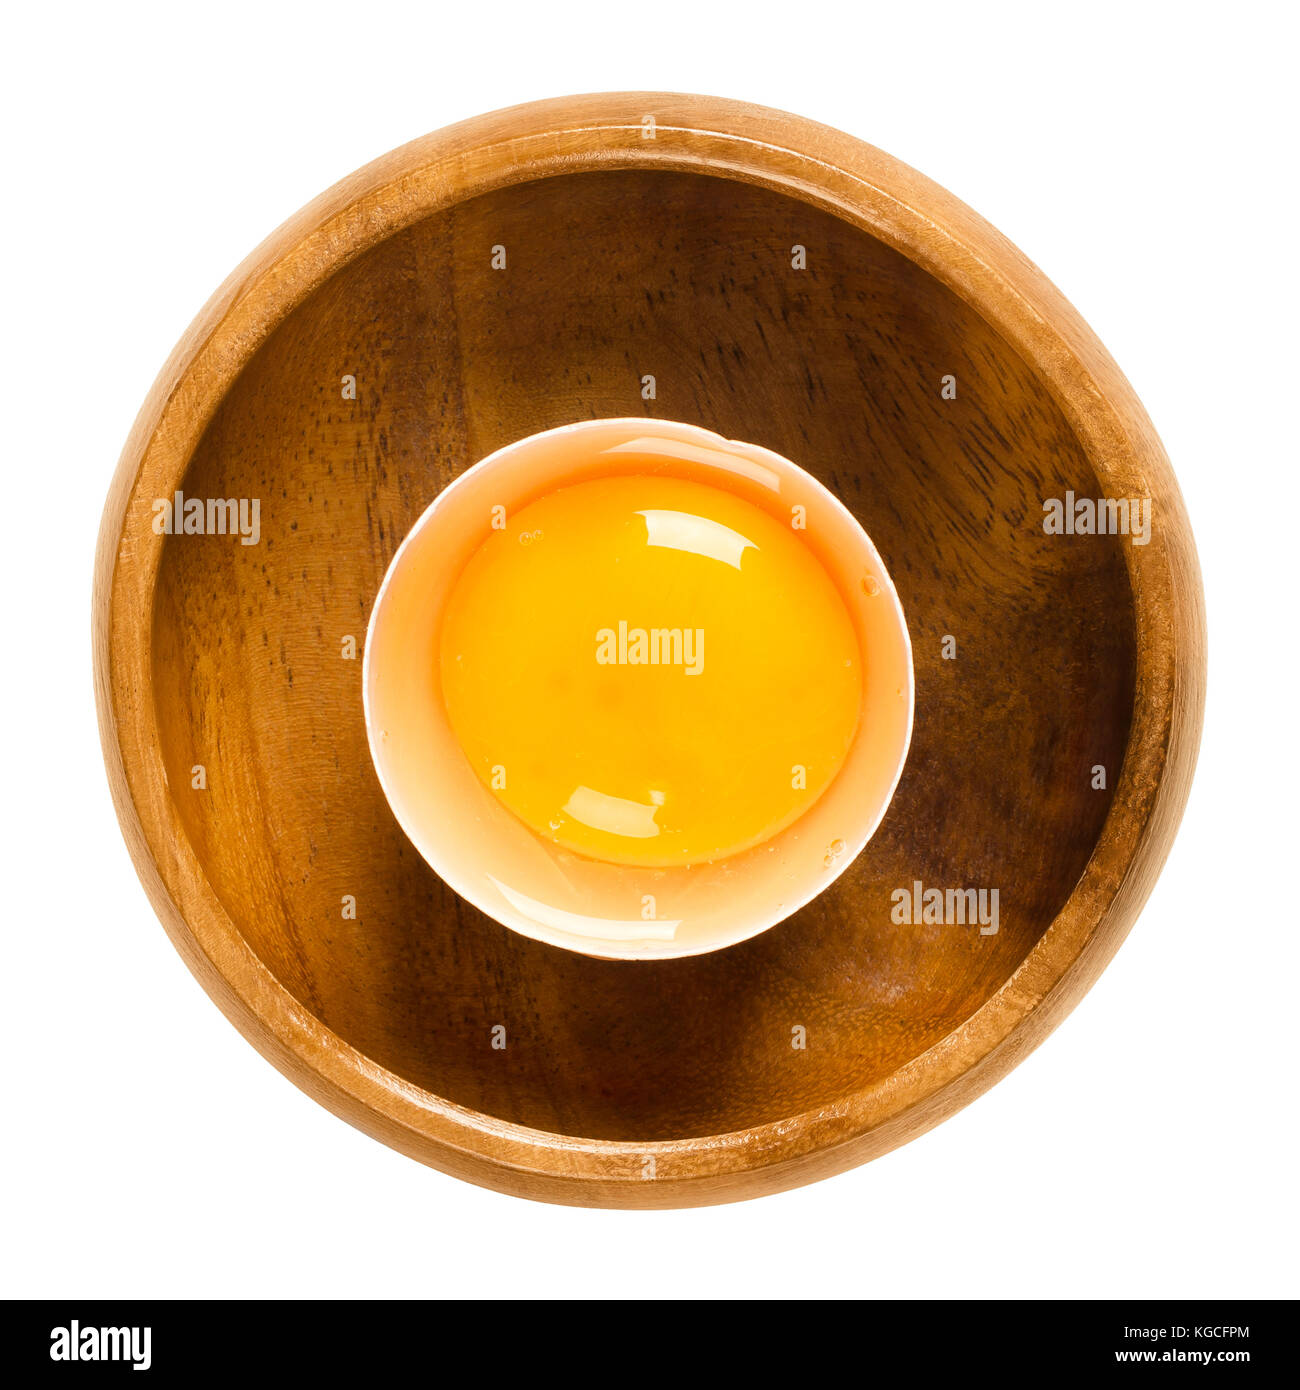 Open raw chicken egg with yolk and white in its shell in a wooden bowl. Common food and versatile ingredient used in cooking. Photo. Stock Photo